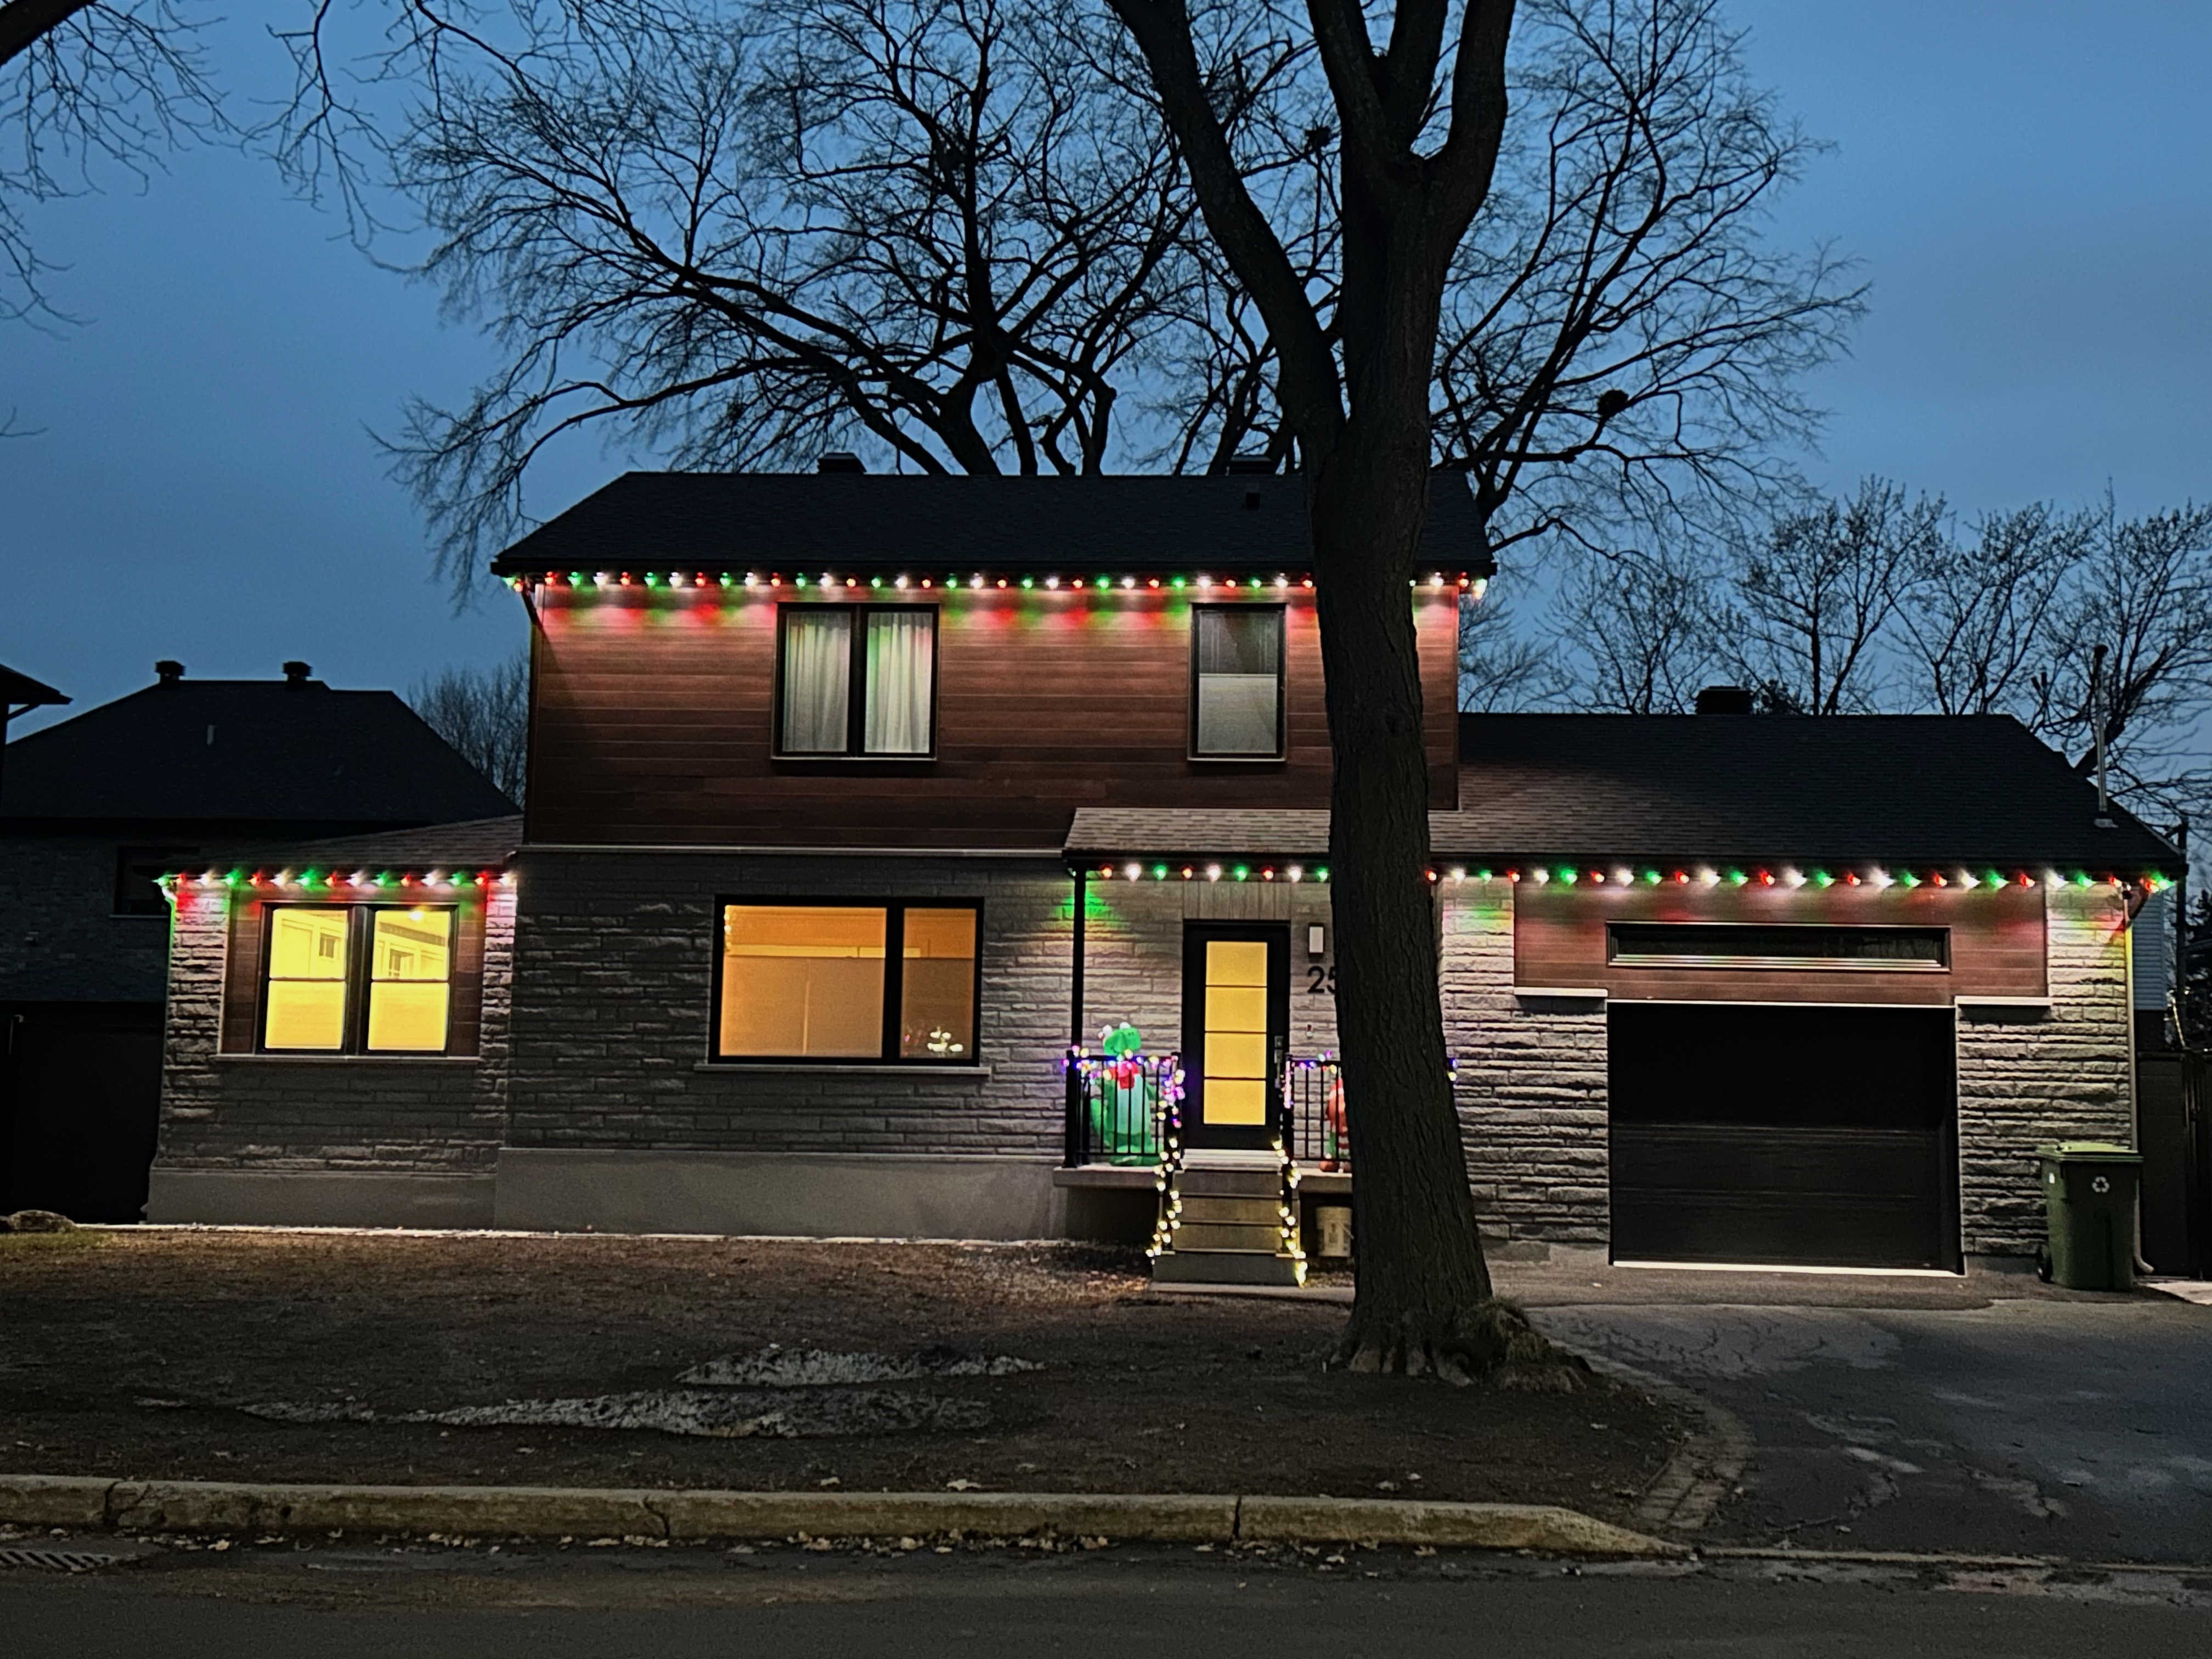 Lighting up beautiful homes with permanent outdoor lighting in Montreal, Qc.